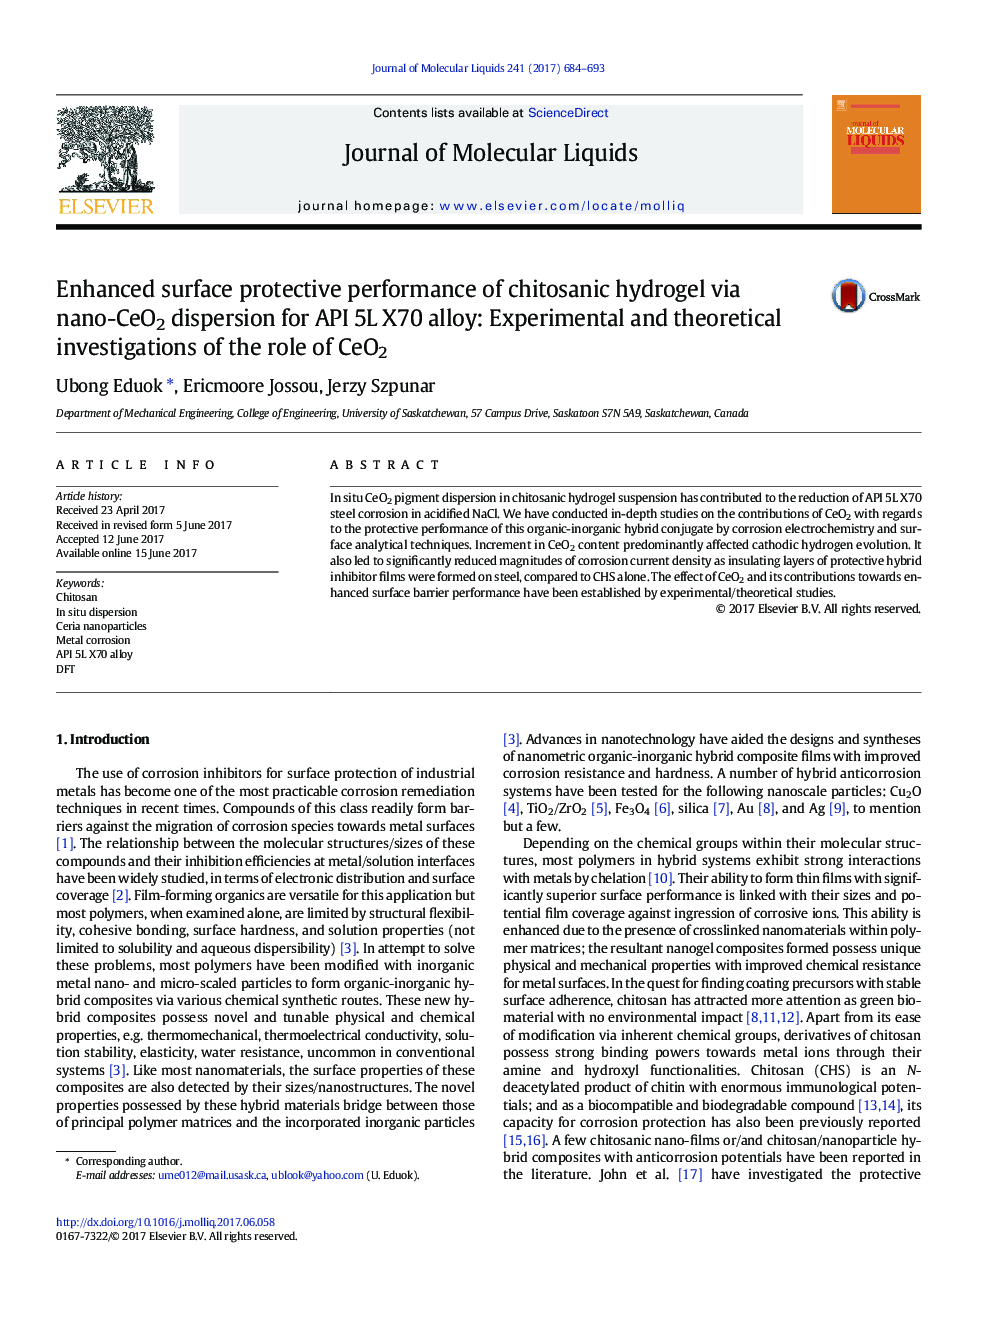 Enhanced surface protective performance of chitosanic hydrogel via nano-CeO2 dispersion for API 5L X70 alloy: Experimental and theoretical investigations of the role of CeO2